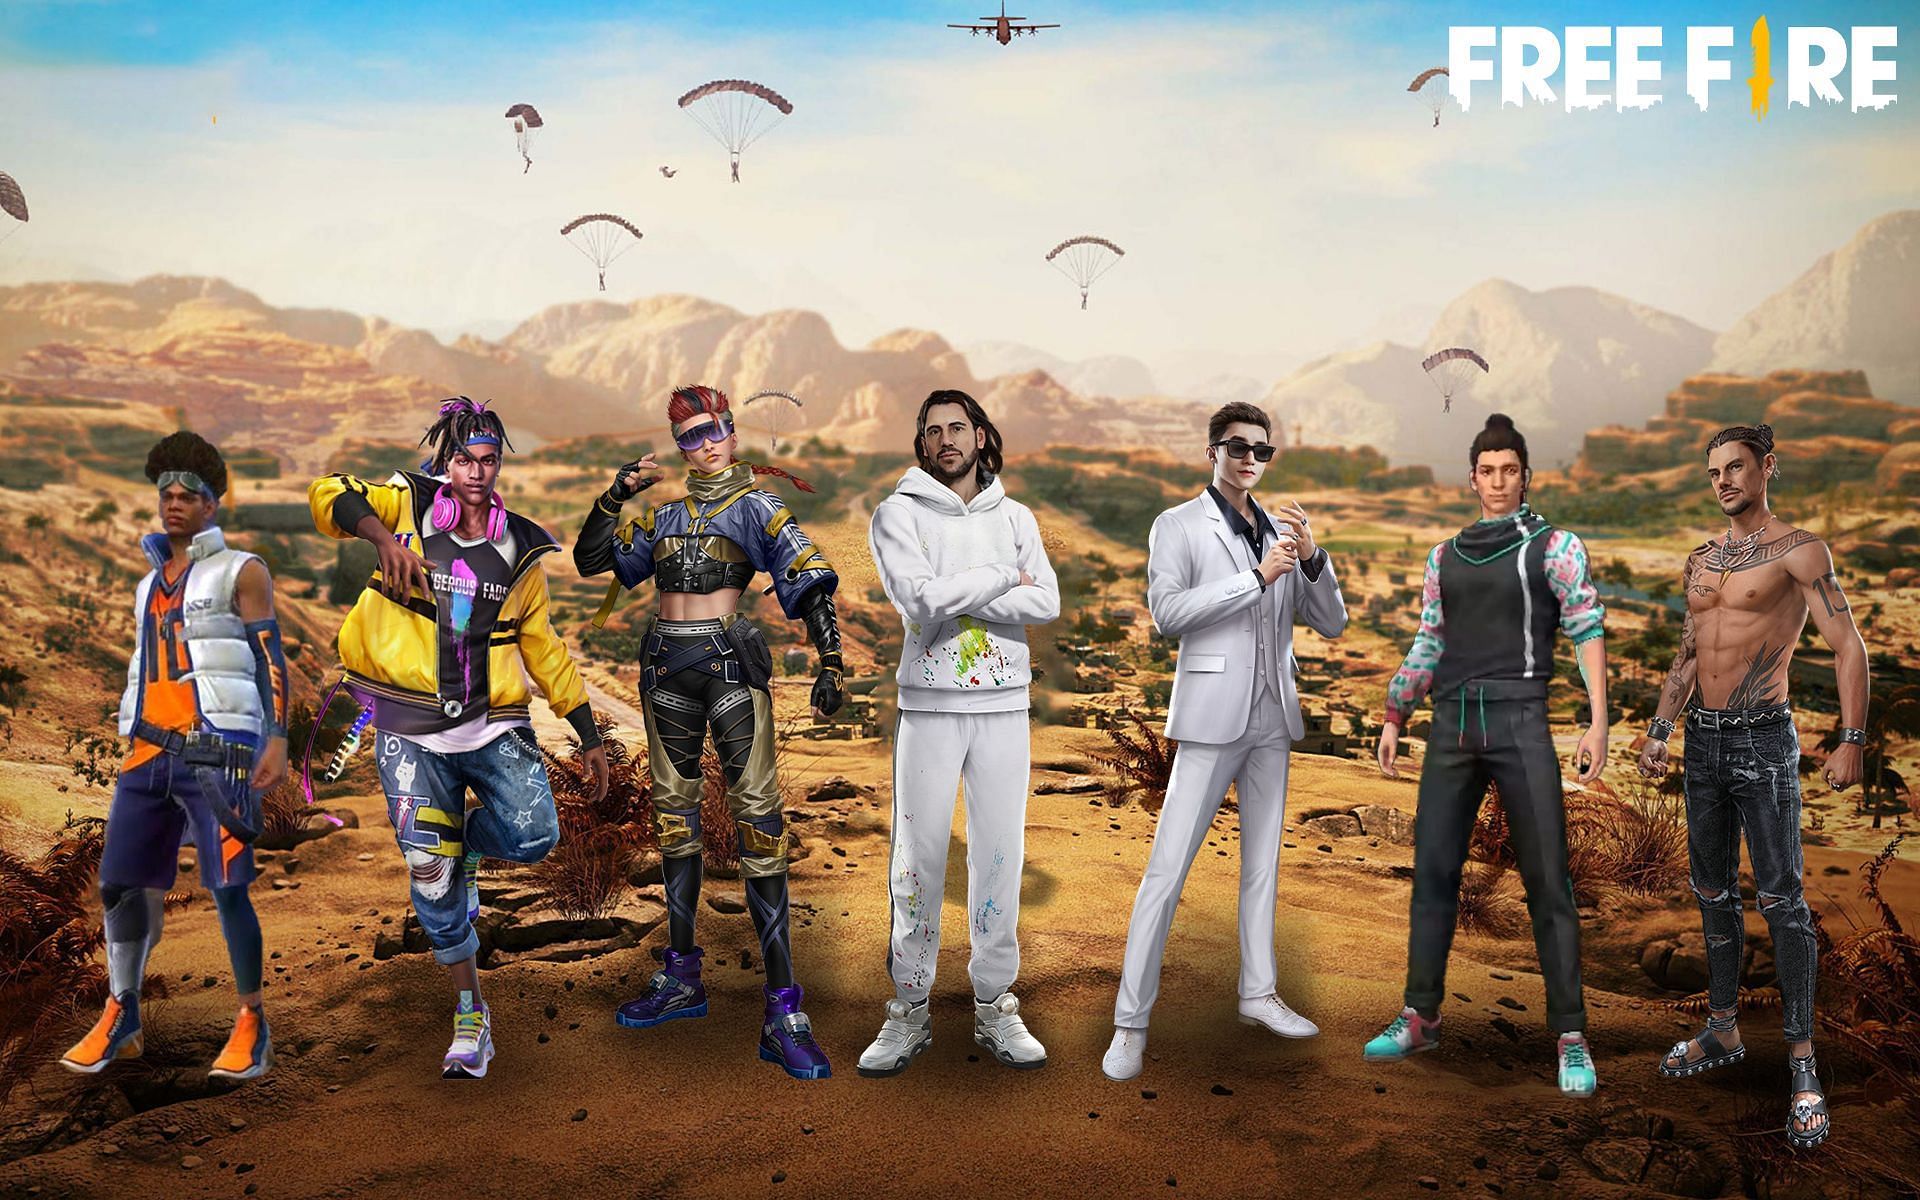 All Free Fire characters that have been released in 2021 (Image via Sportskeeda)